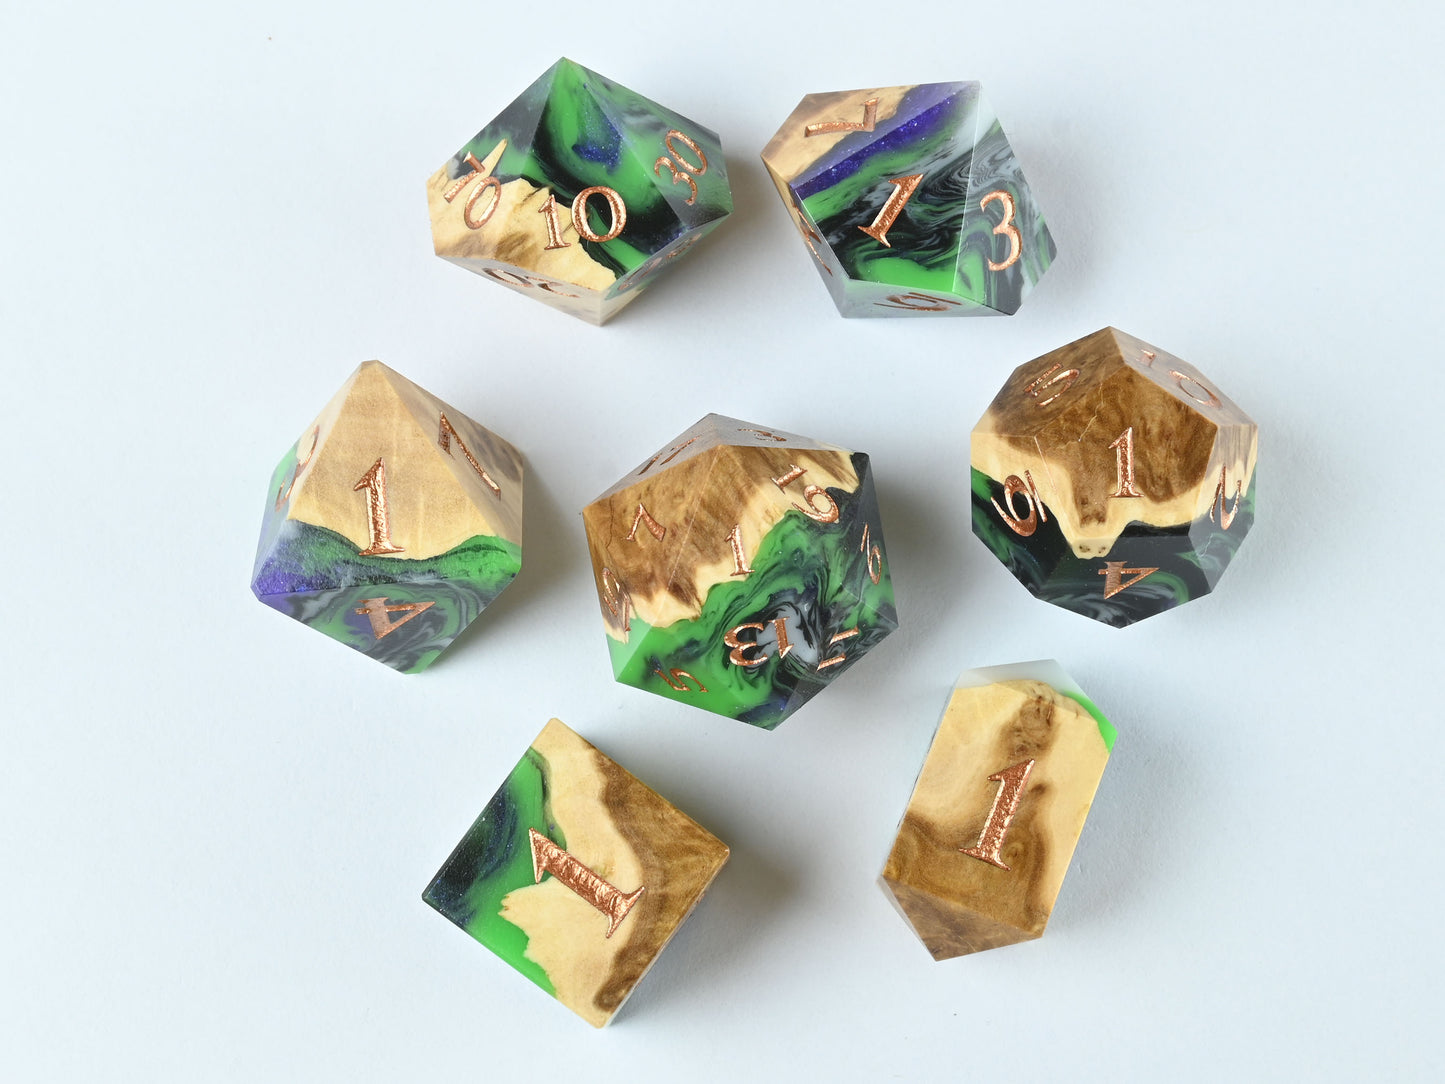 brown mallee burl wood and resin hybrid dice set for ttrpg dnd